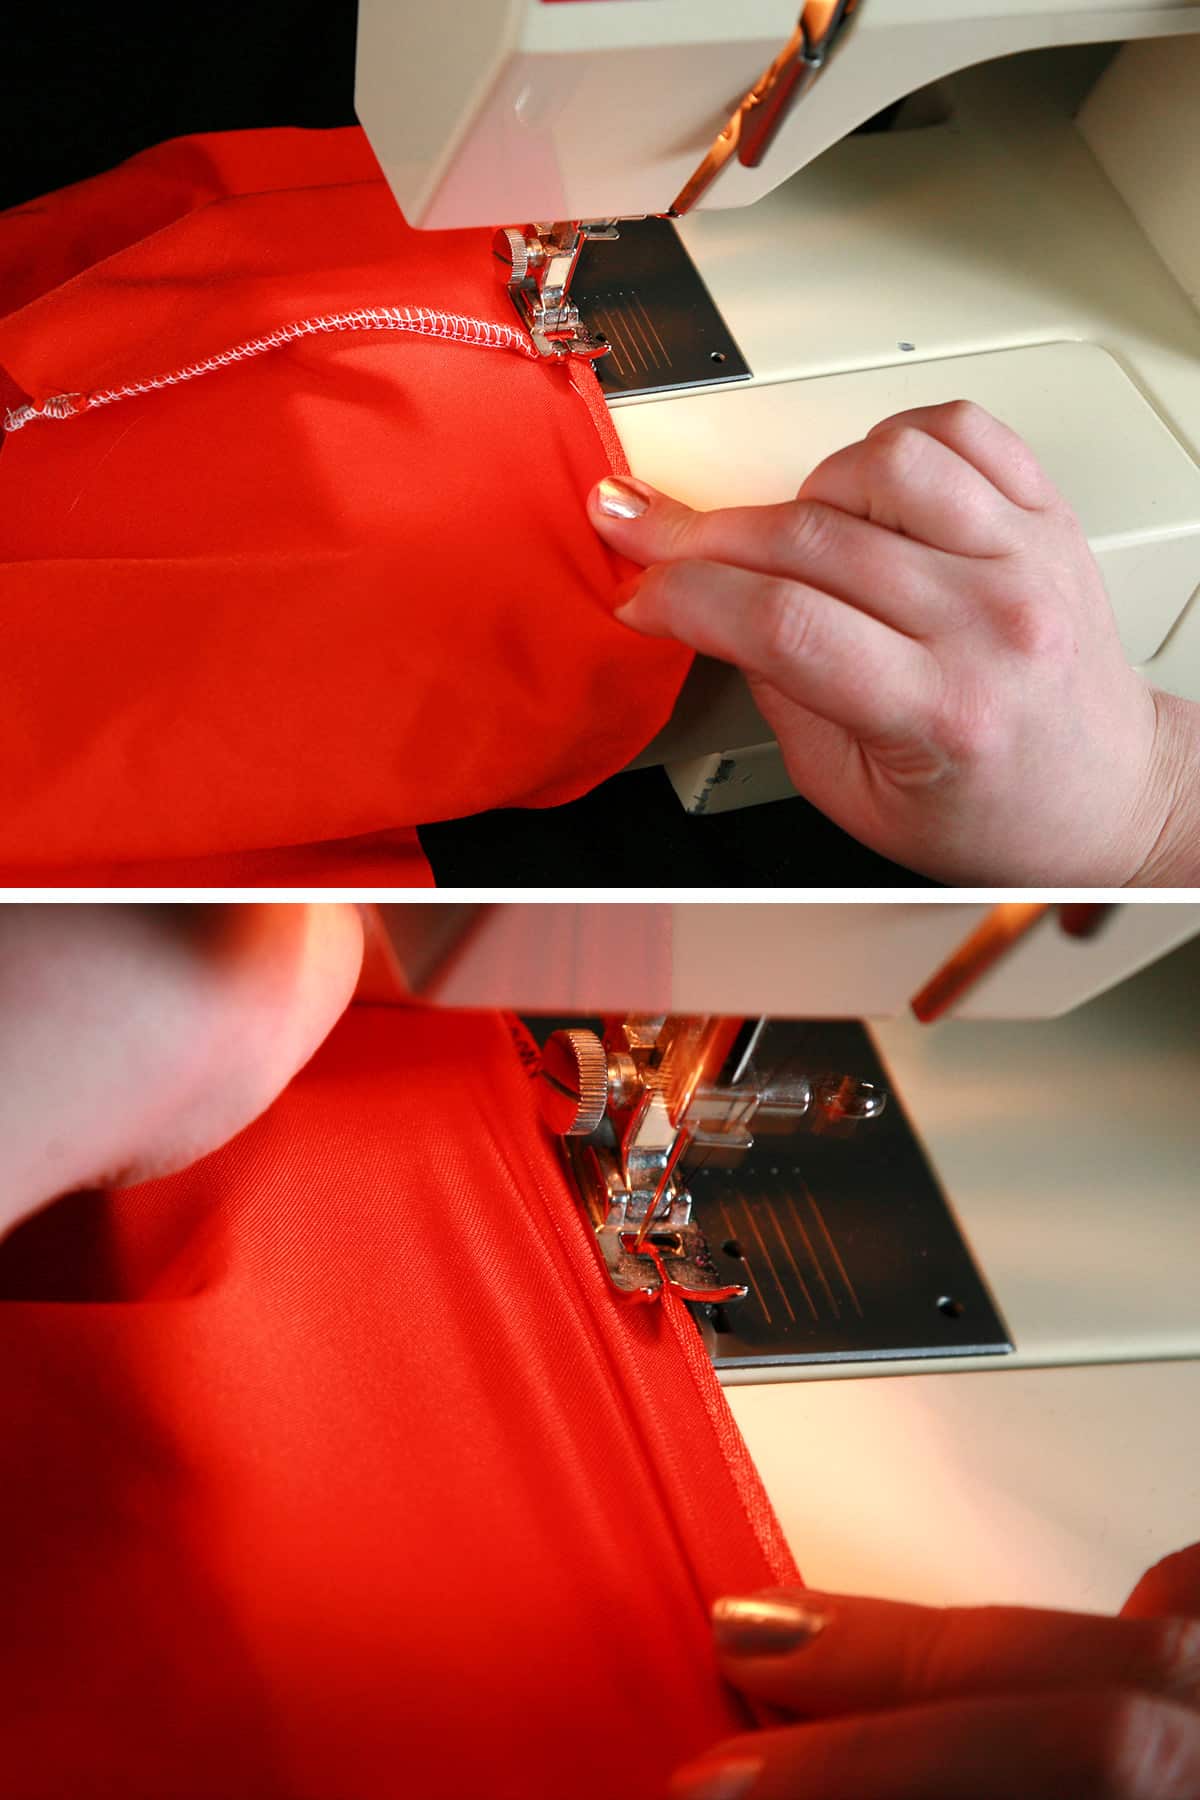 A two part image showing a lettuce edge zig zag hem being applied to an orange skating skirt.